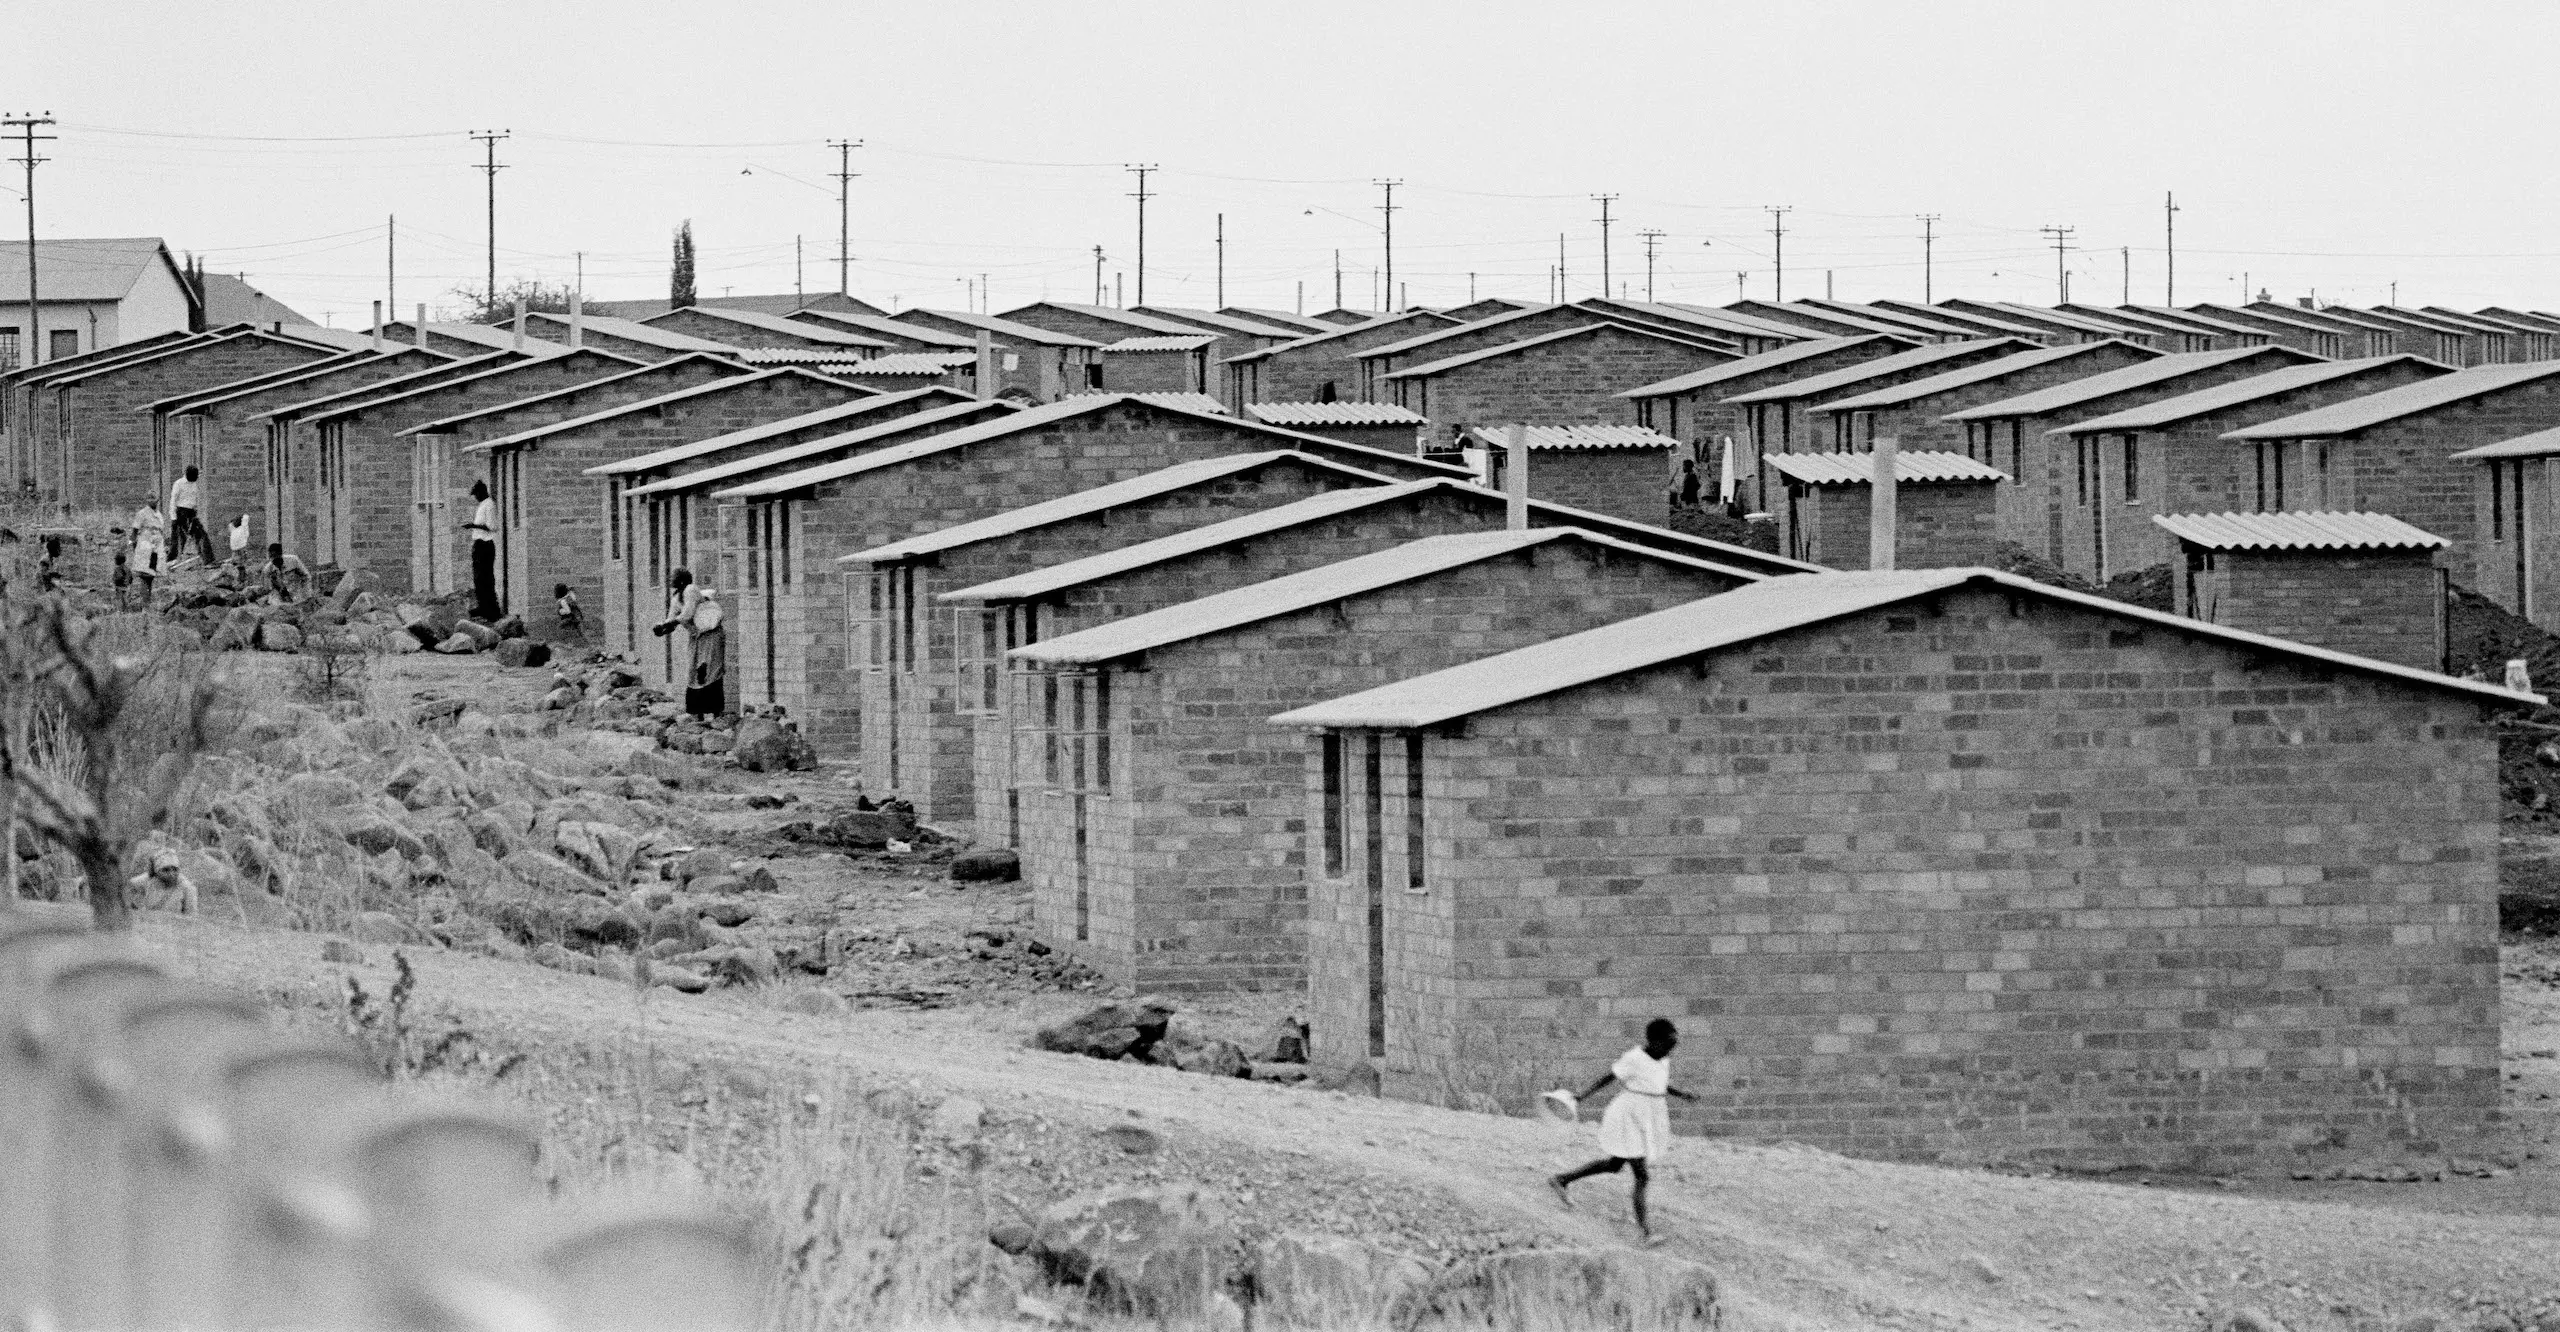 Black and white landscape photograph of a row of houses. A child can be seen walking along a pathway and a group of people are stood outside the houses in the distance.